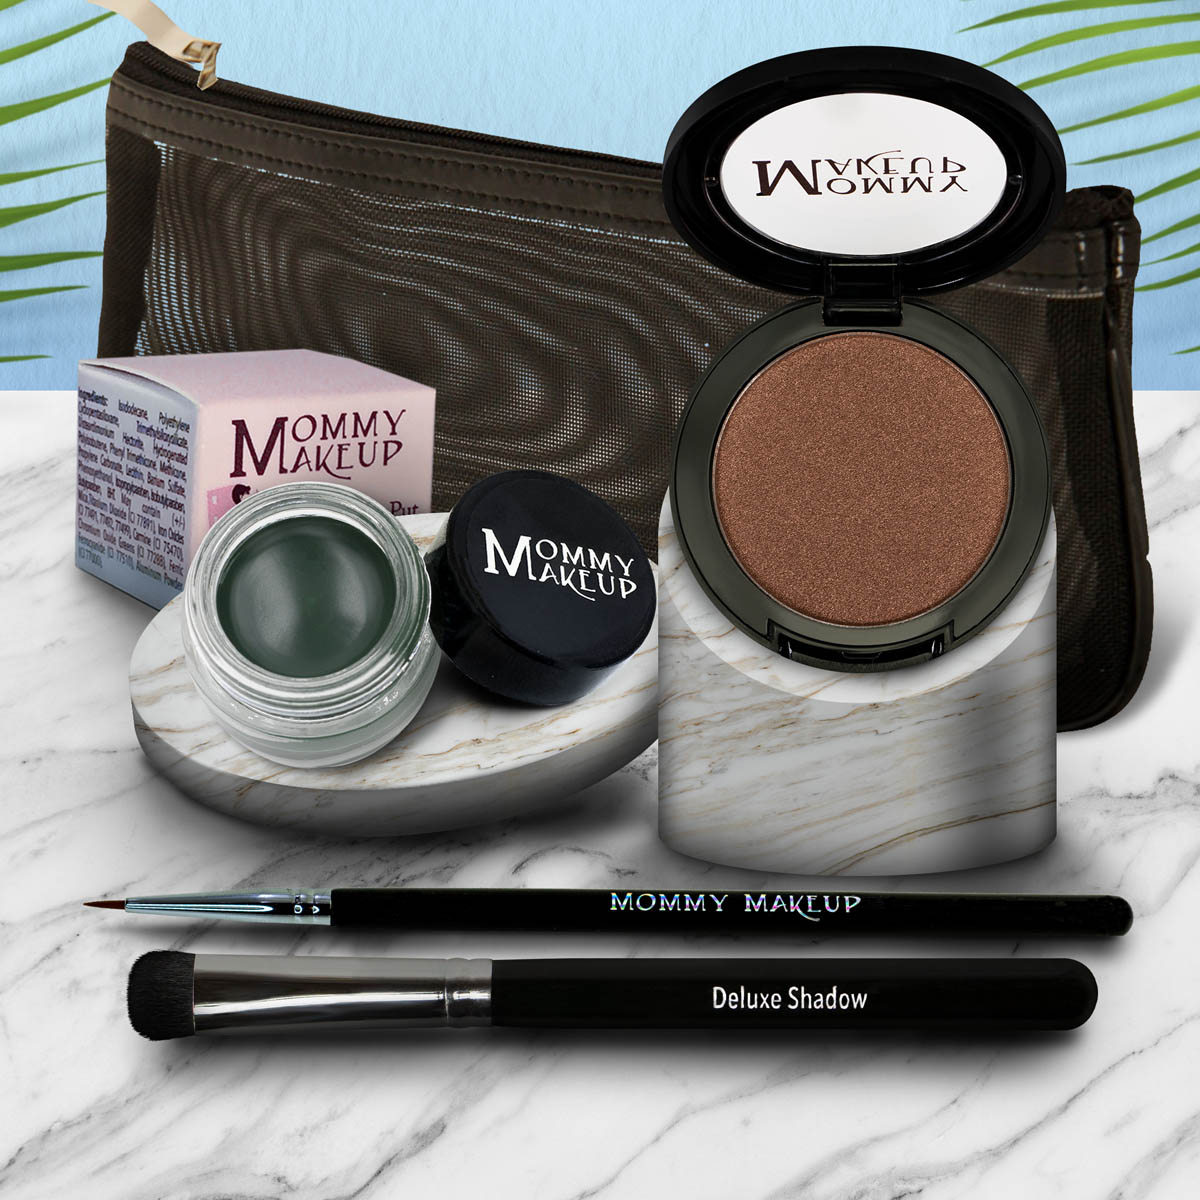 Create a long-wearing, glowing look for your eyes and entire face with the Eye Love It Set! A 5 piece talc-free makeup set that you can customize.